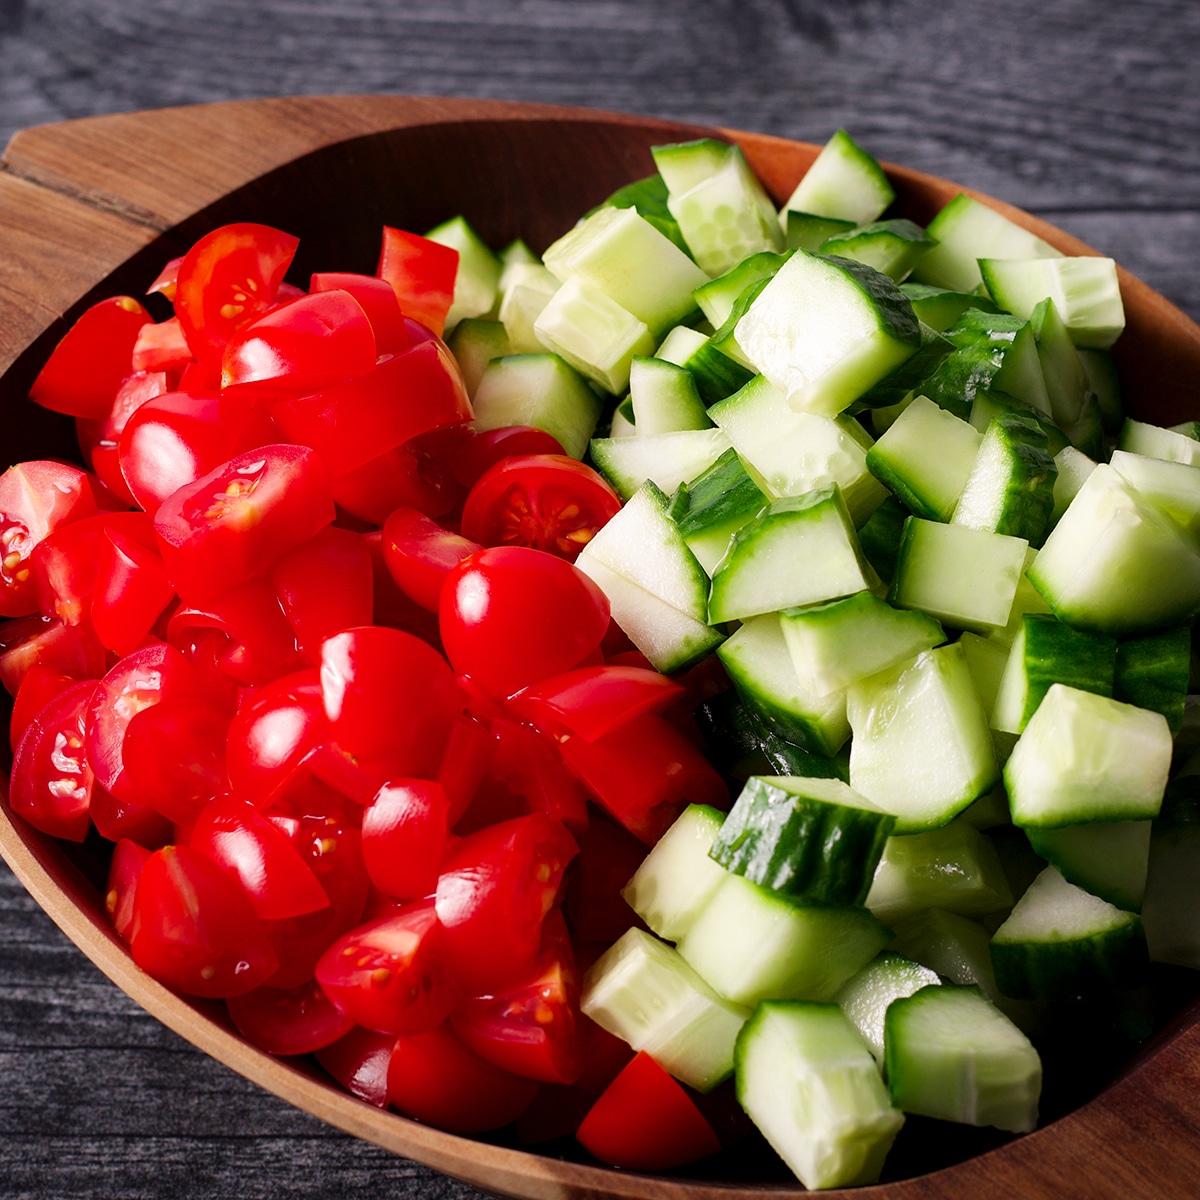 Chopped cherry tomatoes and cucumbers in a wood bowl.